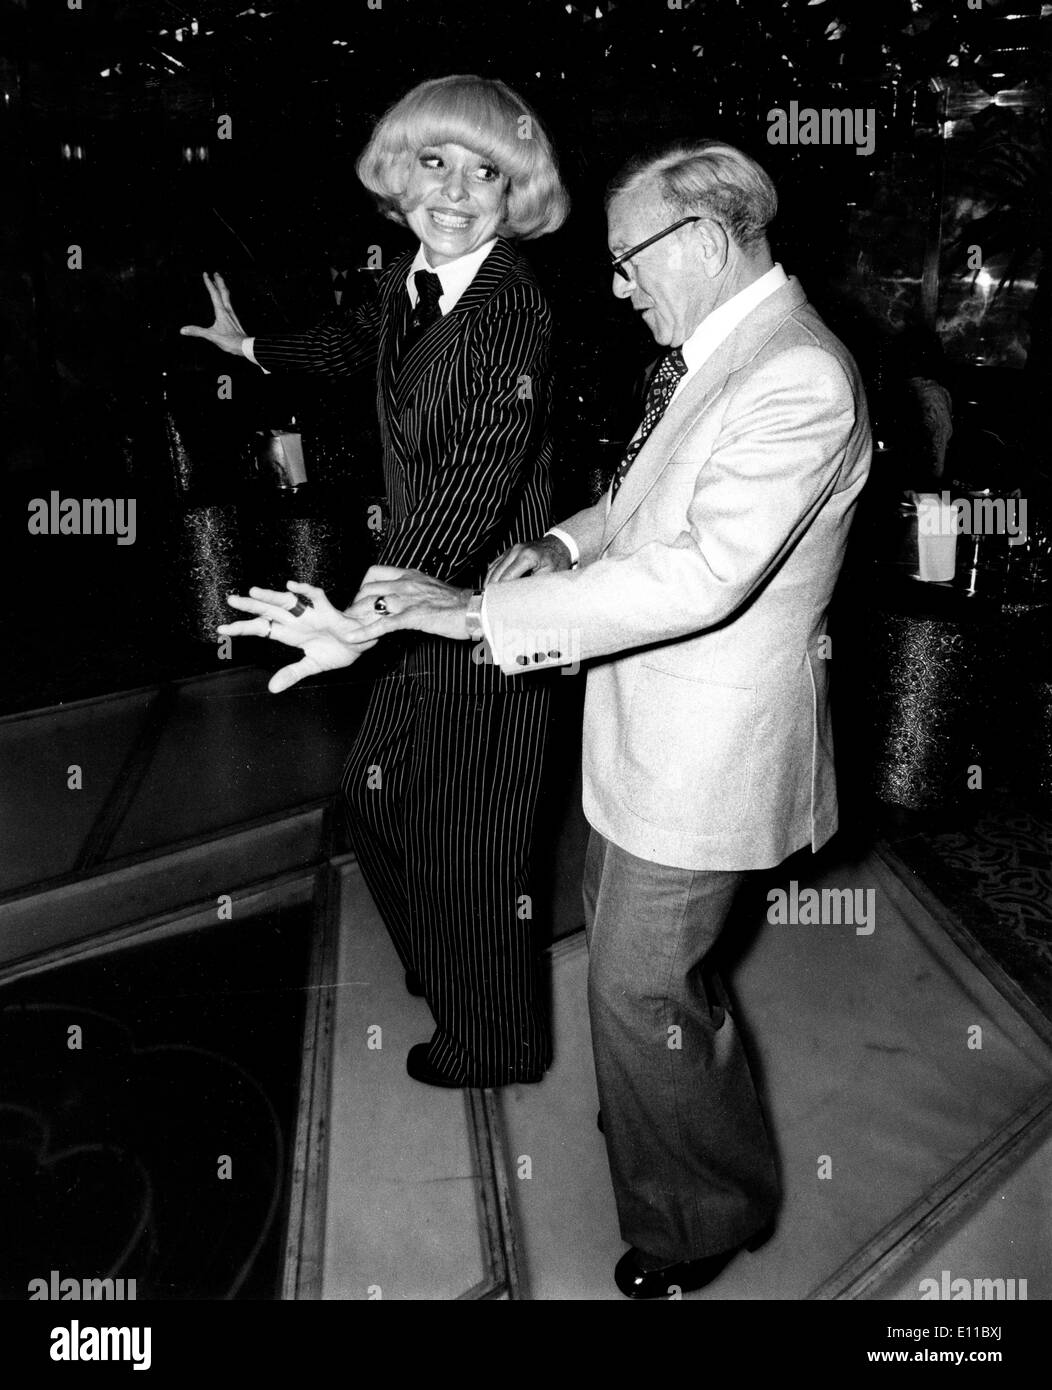 Aug 16, 1976 - New York, New York, U.S. - CAROL CHANNING with GEORGE BURNS at Regine's disco in New York's Delmonico Hotel. They will open their two-person revue on Tuesday at the Westbury Music Fair in Westbury, New York. . Carol ElaineCchanning (born January 31, 1921, Seattle, Washington) is an American singer and actress. The recipient of three Tony Awards (including one for lifetime achievement), a Golden Globe and an Oscar nomination, Channing is best remembered for her role Lorelei Lee in Gentlemen Prefer Blondes, and as Dolly Gallagher Levi in Hello, Dolly! Stock Photo